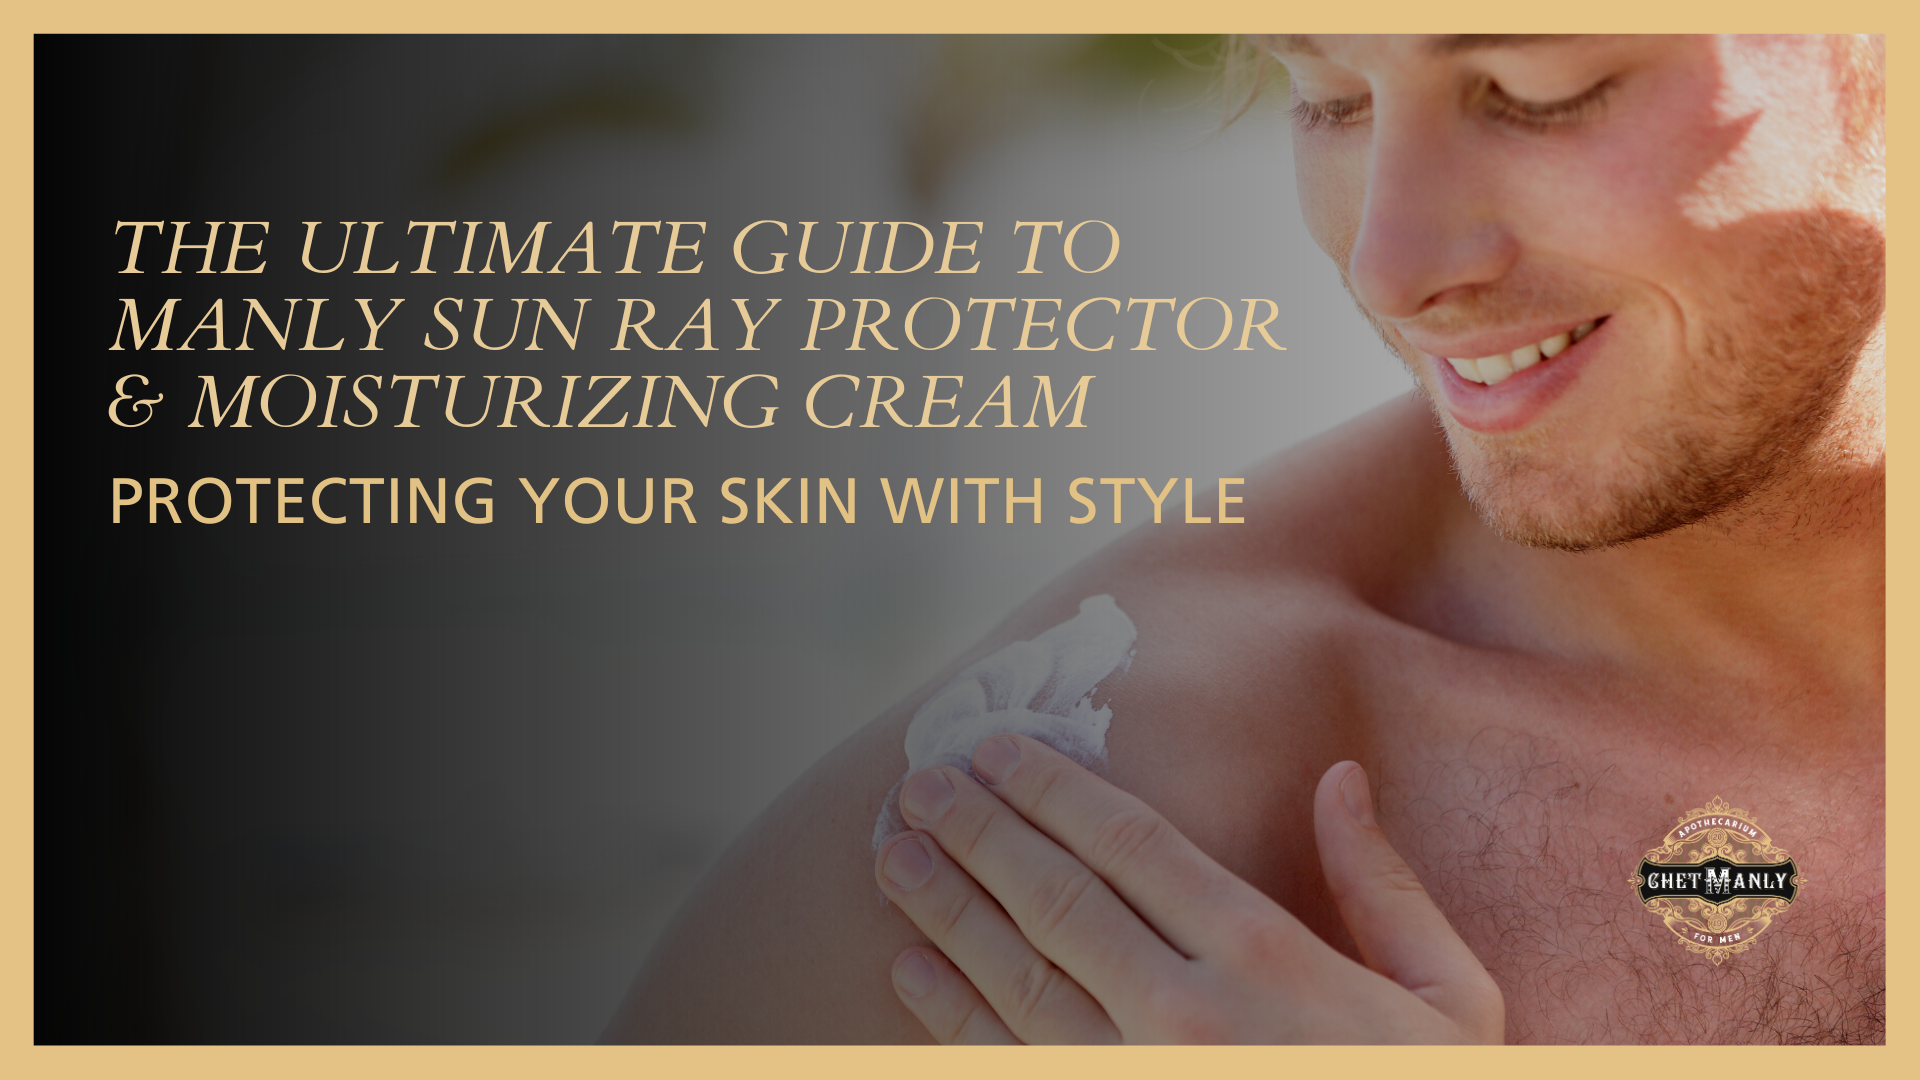 The Ultimate Guide to Manly Sun Ray Protector & Moisturizing Cream: Protecting Your Skin with Style